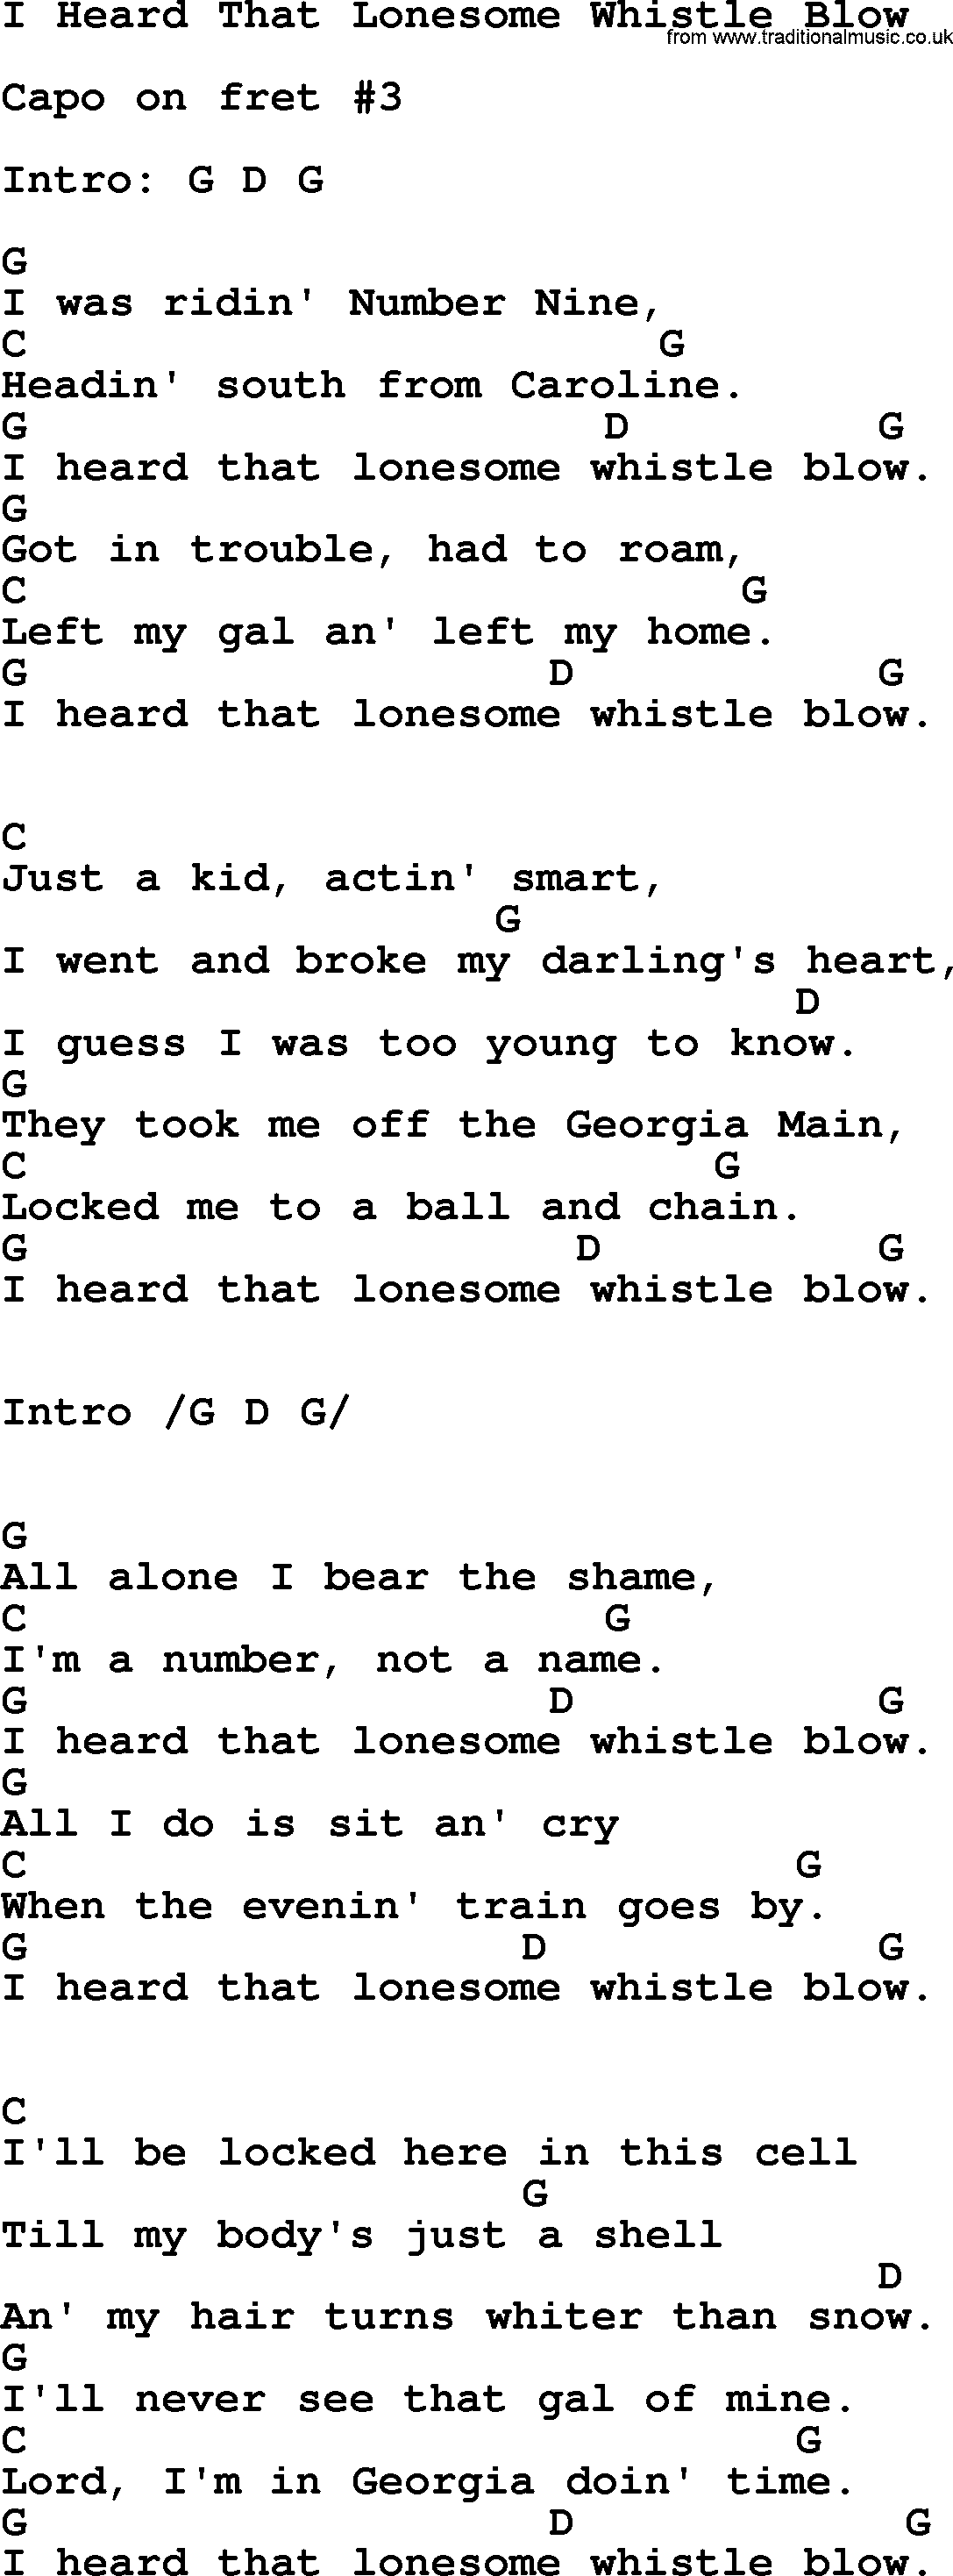 Johnny Cash song I Heard That Lonesome Whistle Blow, lyrics and chords